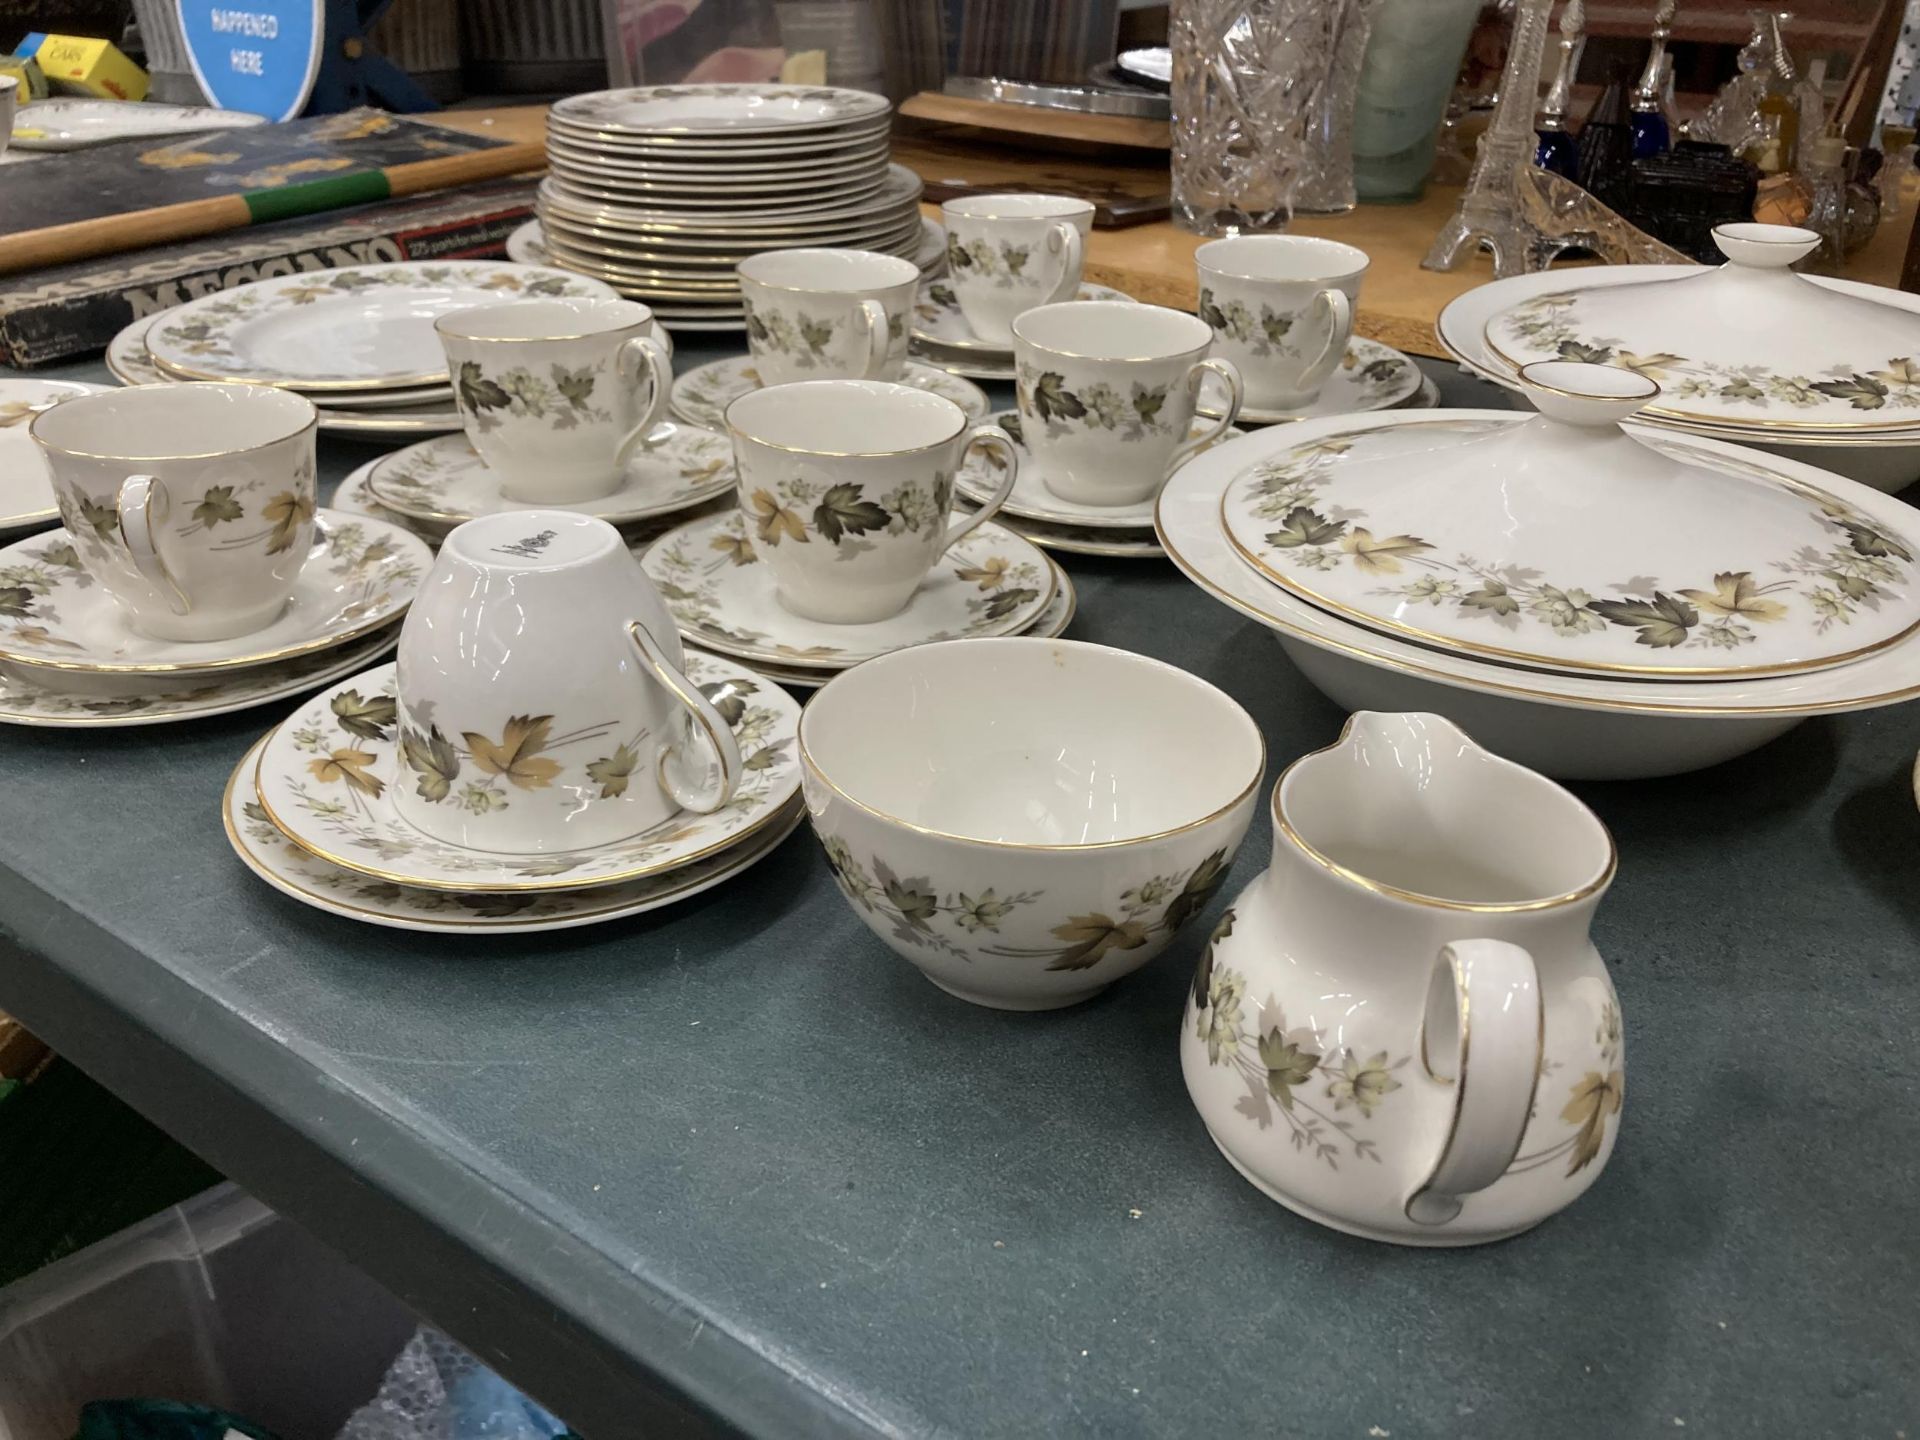 A ROYAL DOULTON 'LARCHMONT' PART DINNER SERVICE TO INCLUDE SERVING TUREENS, VARIOUS SIZES OF PLATES, - Image 3 of 5